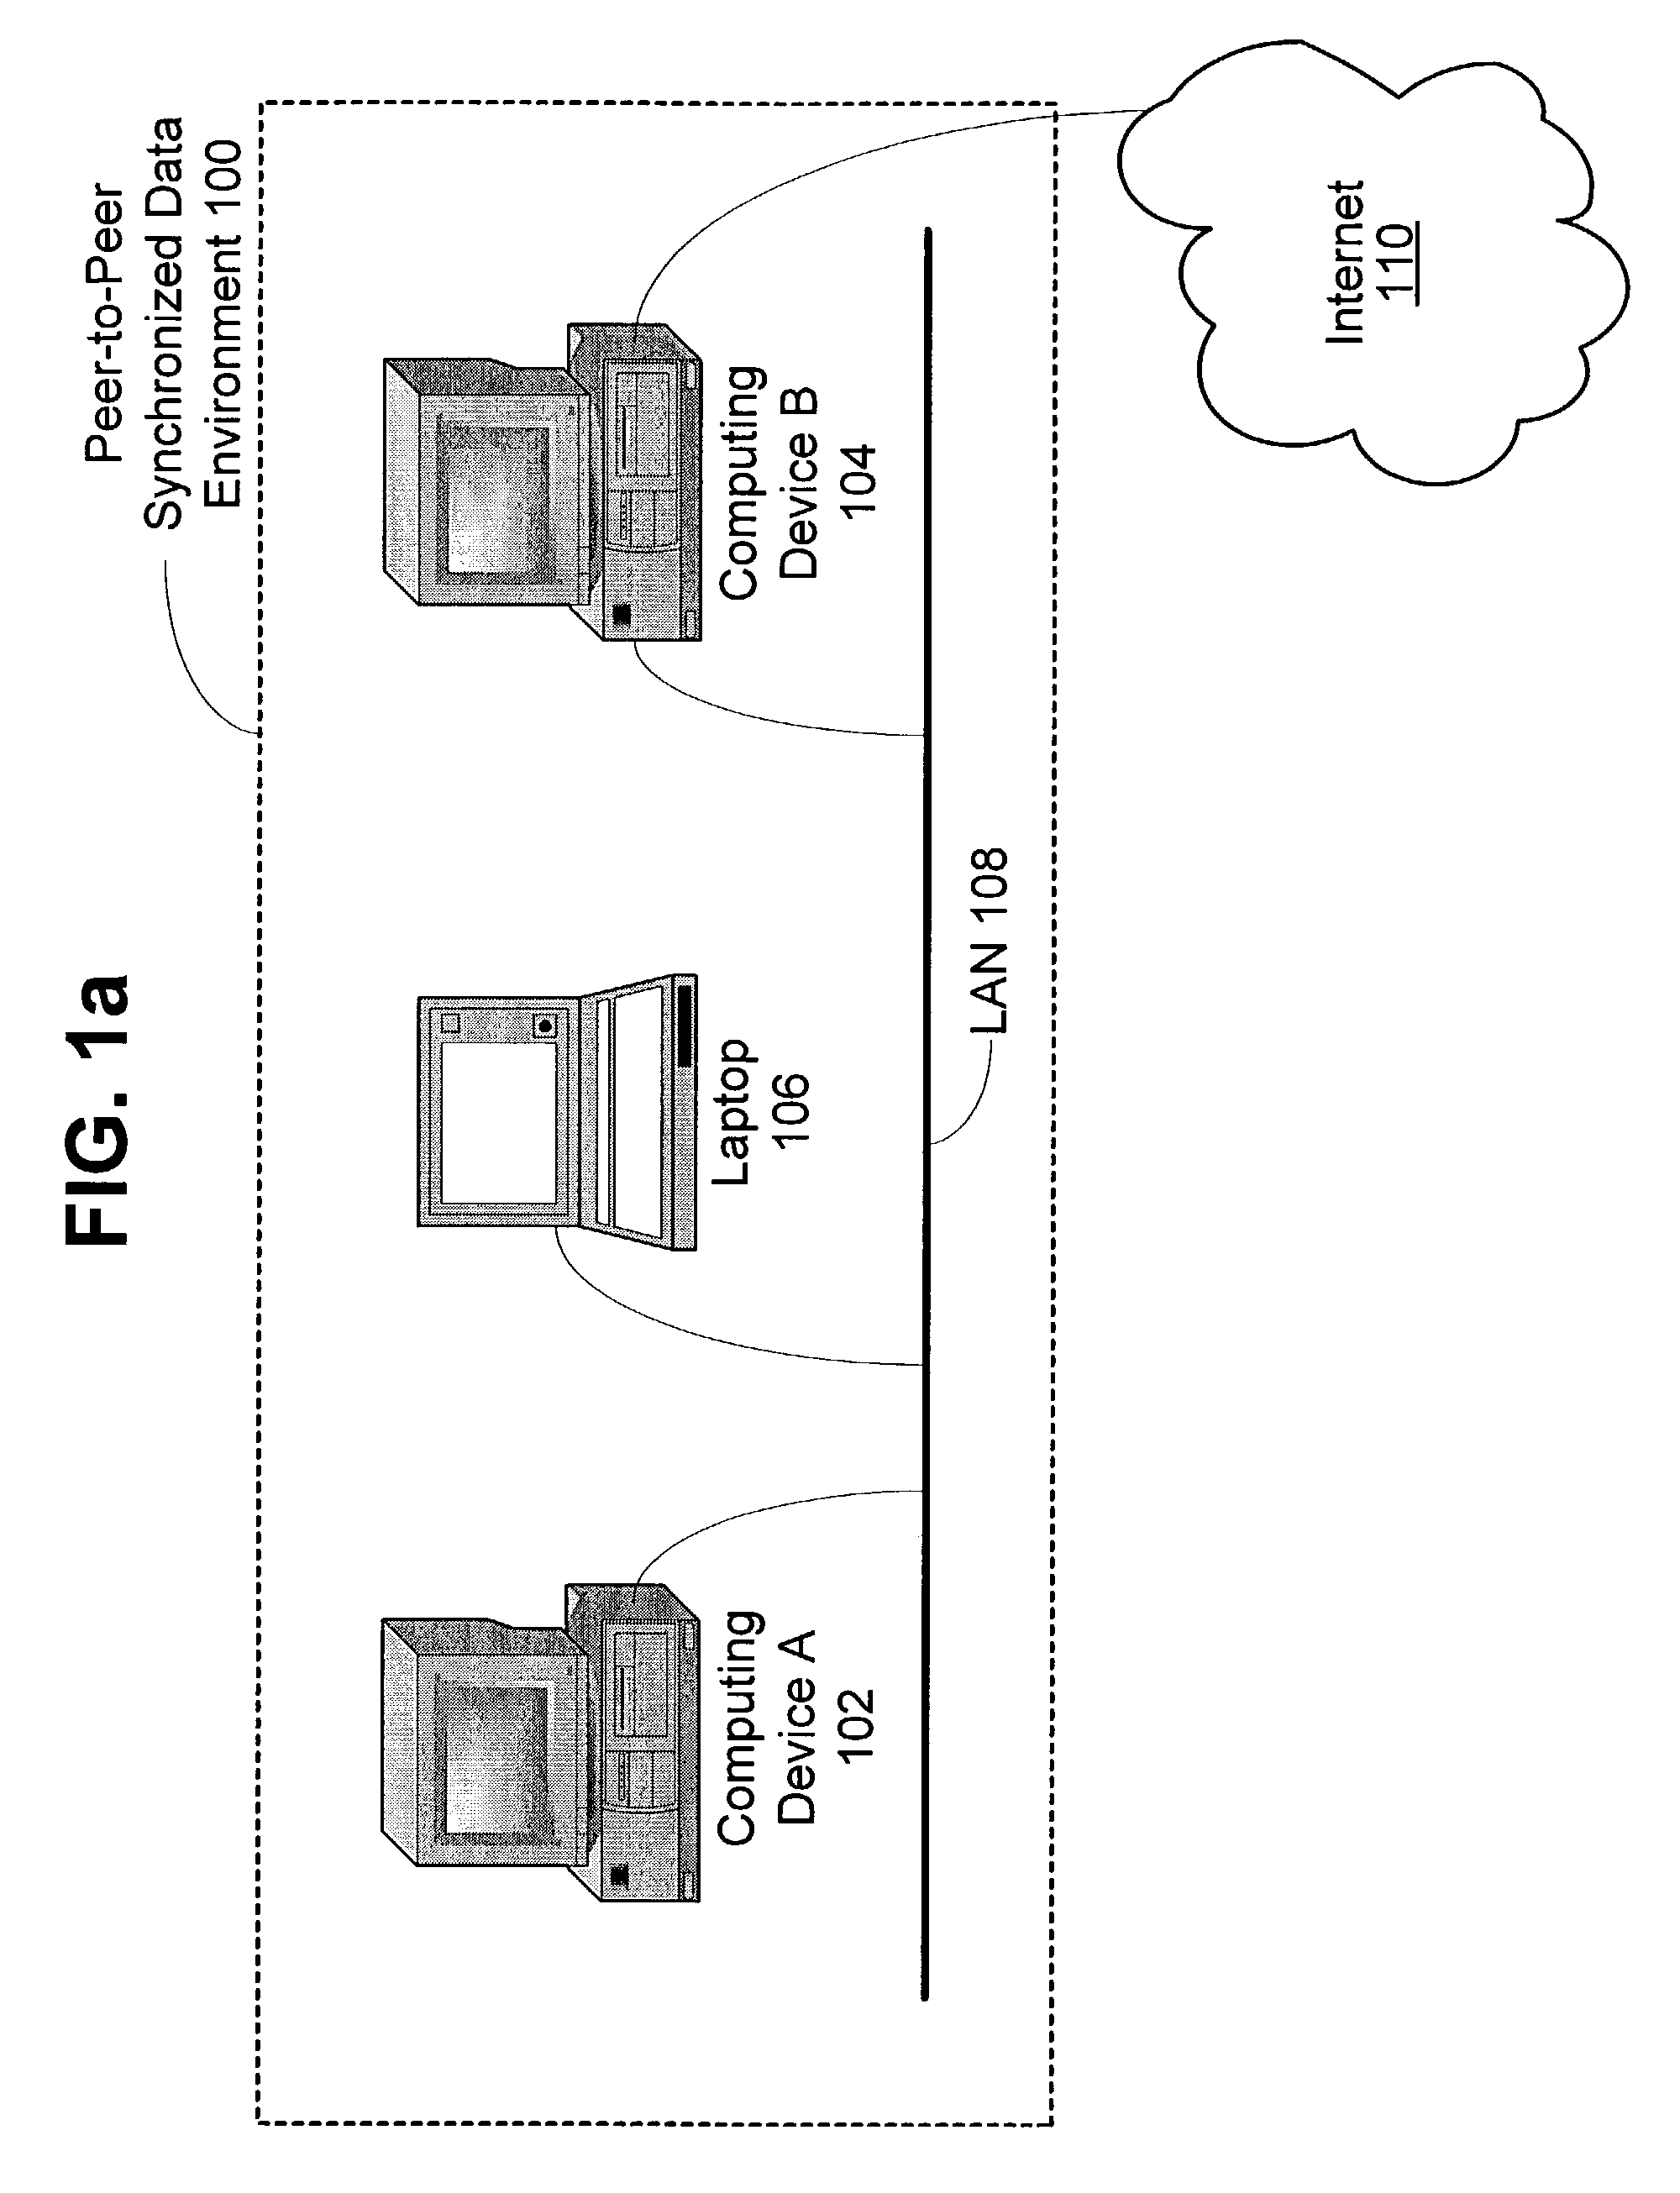 Method and system for synchronizing data shared among peer computing devices